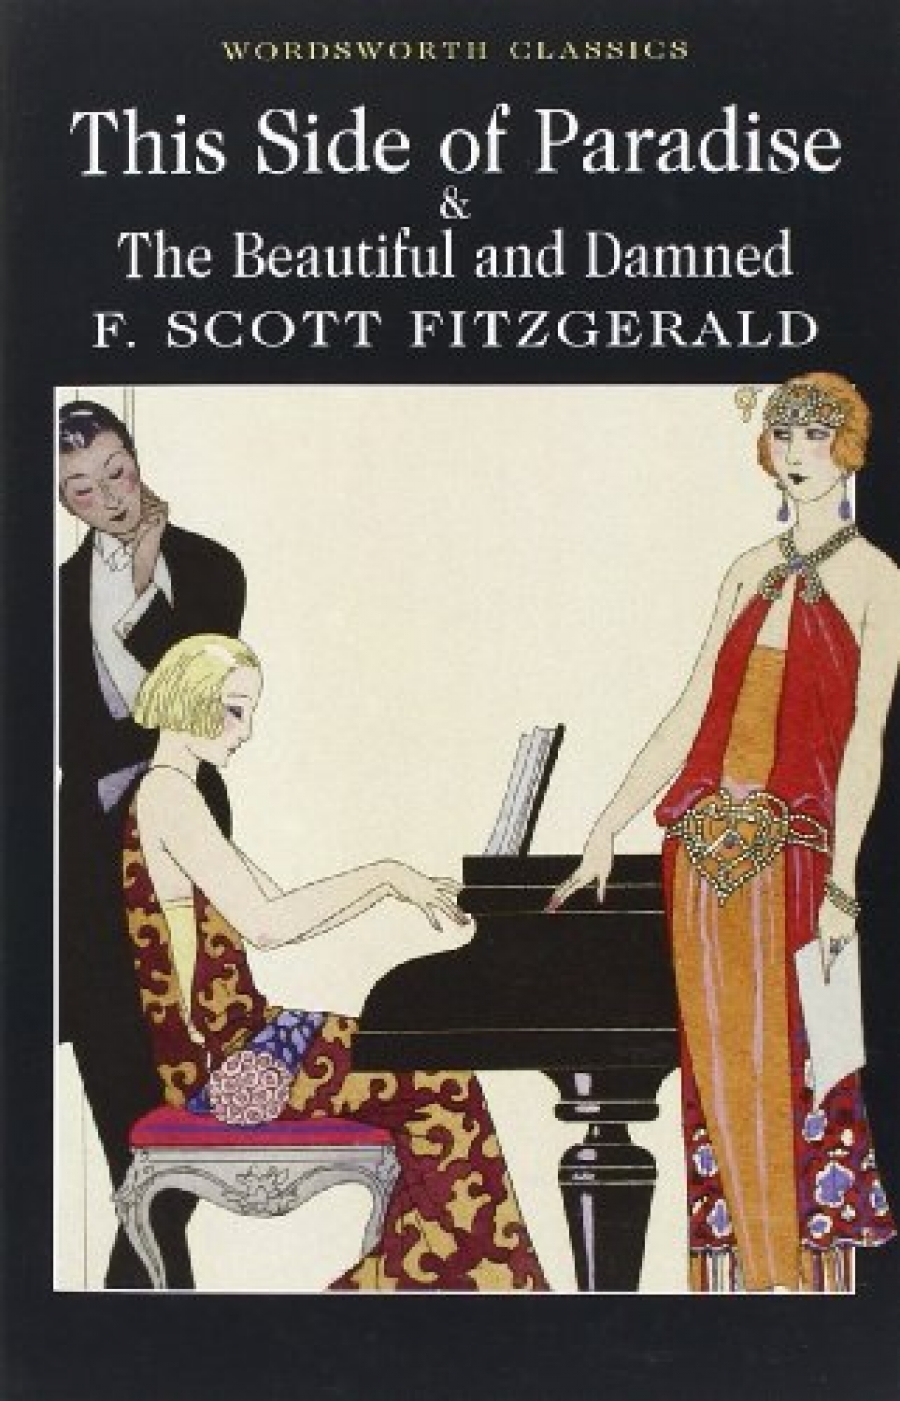 Francis Scott Fitzgerald This Side of Paradise & Beautiful and Damned 